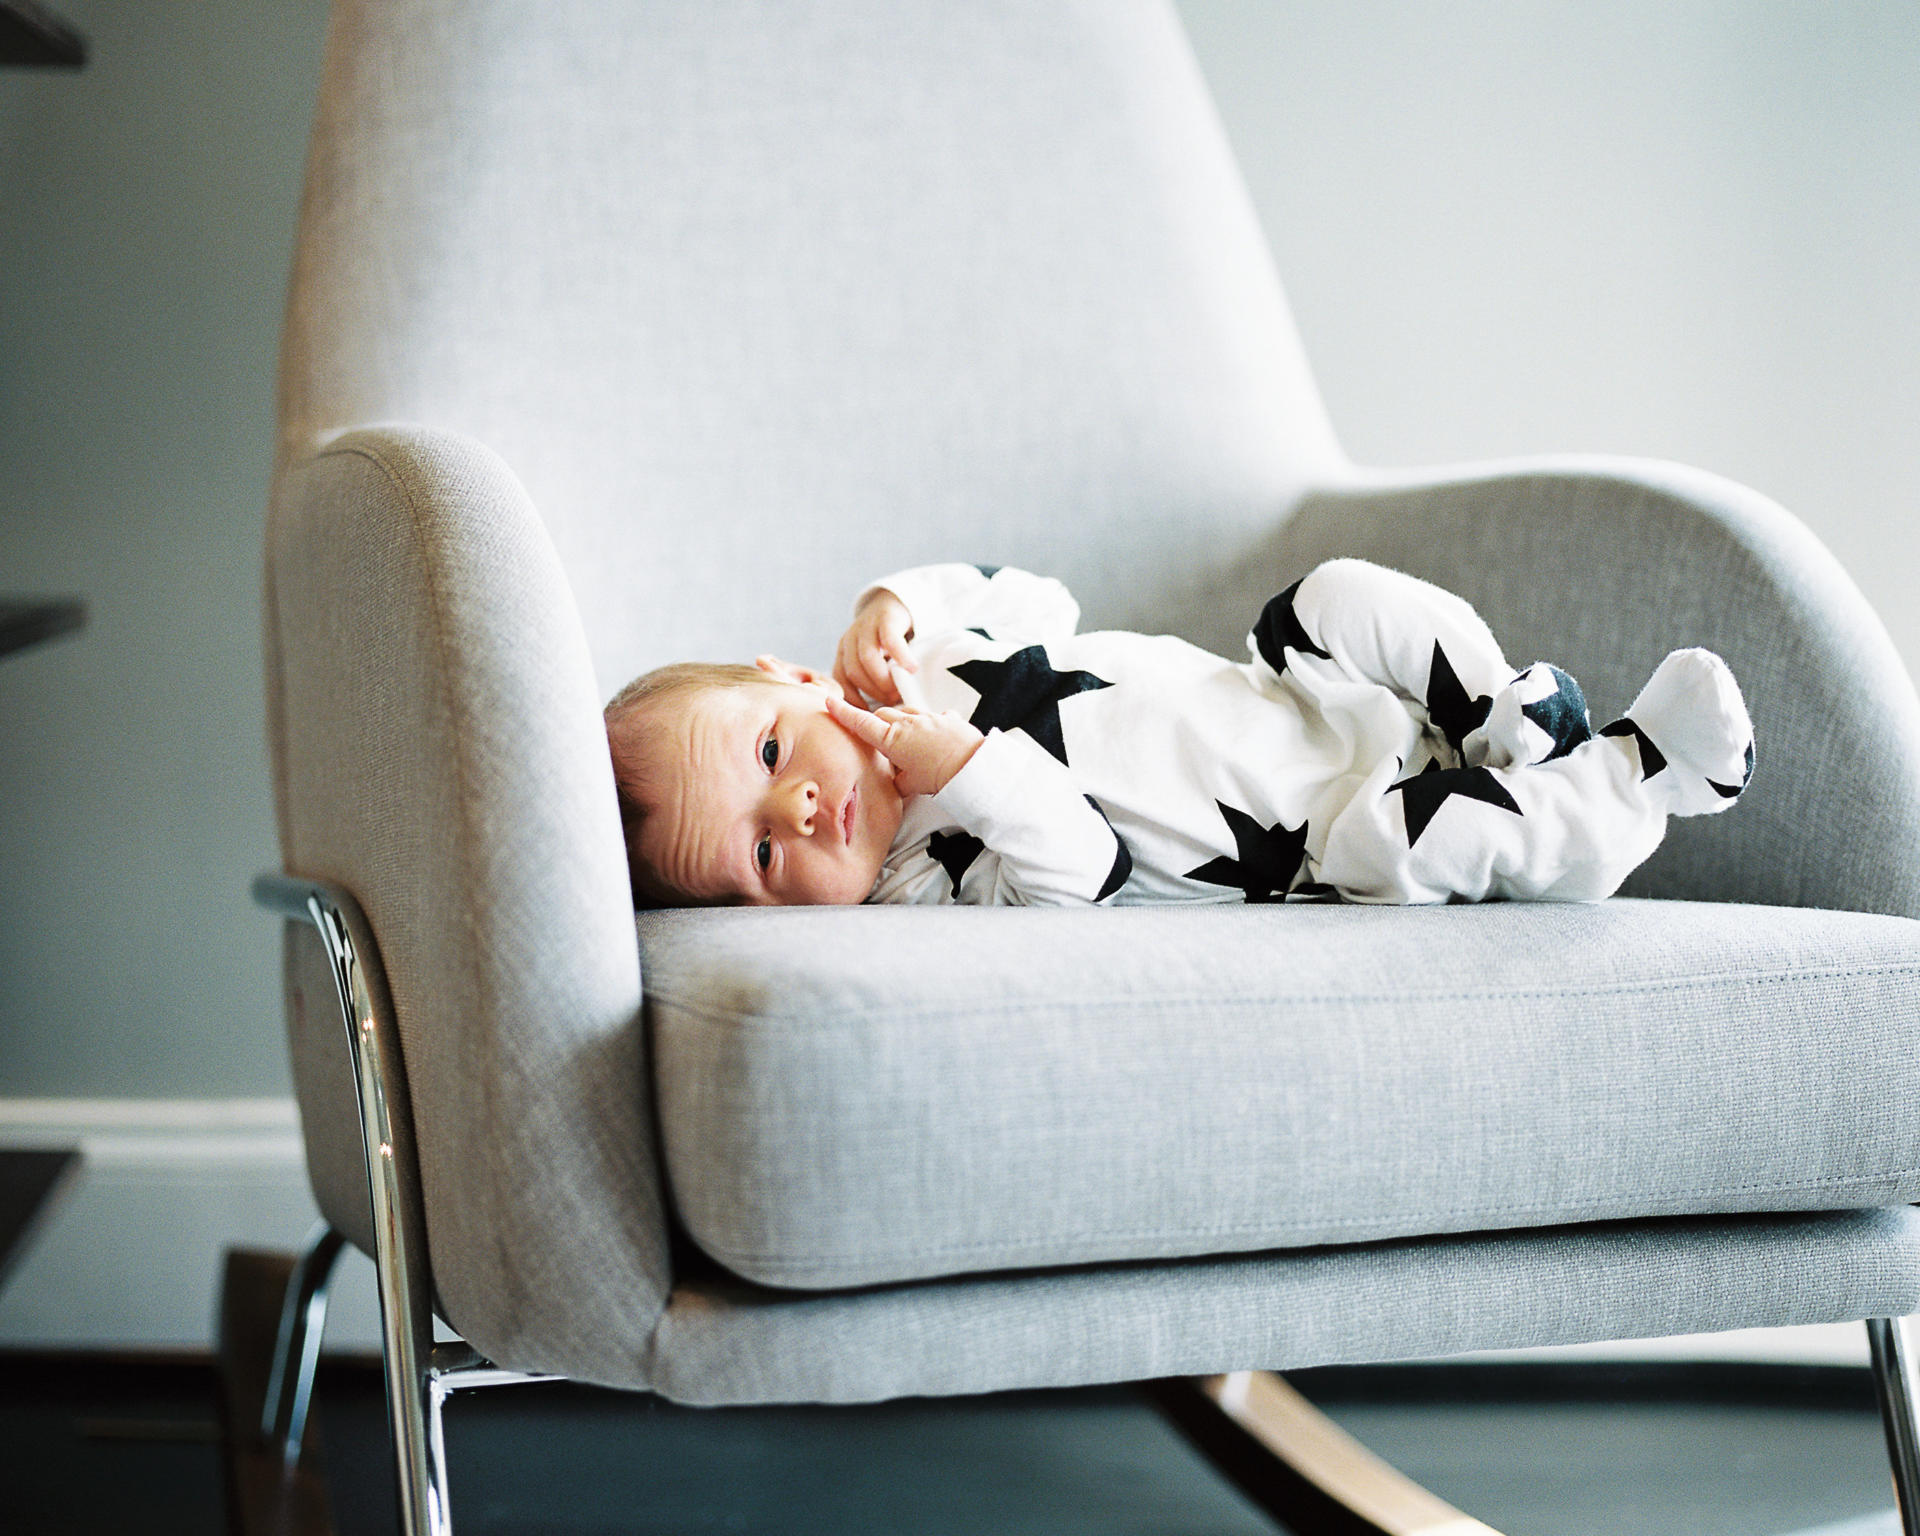 Bookmark this post to read Holdens birth story and find inspiration for your modern nursery.